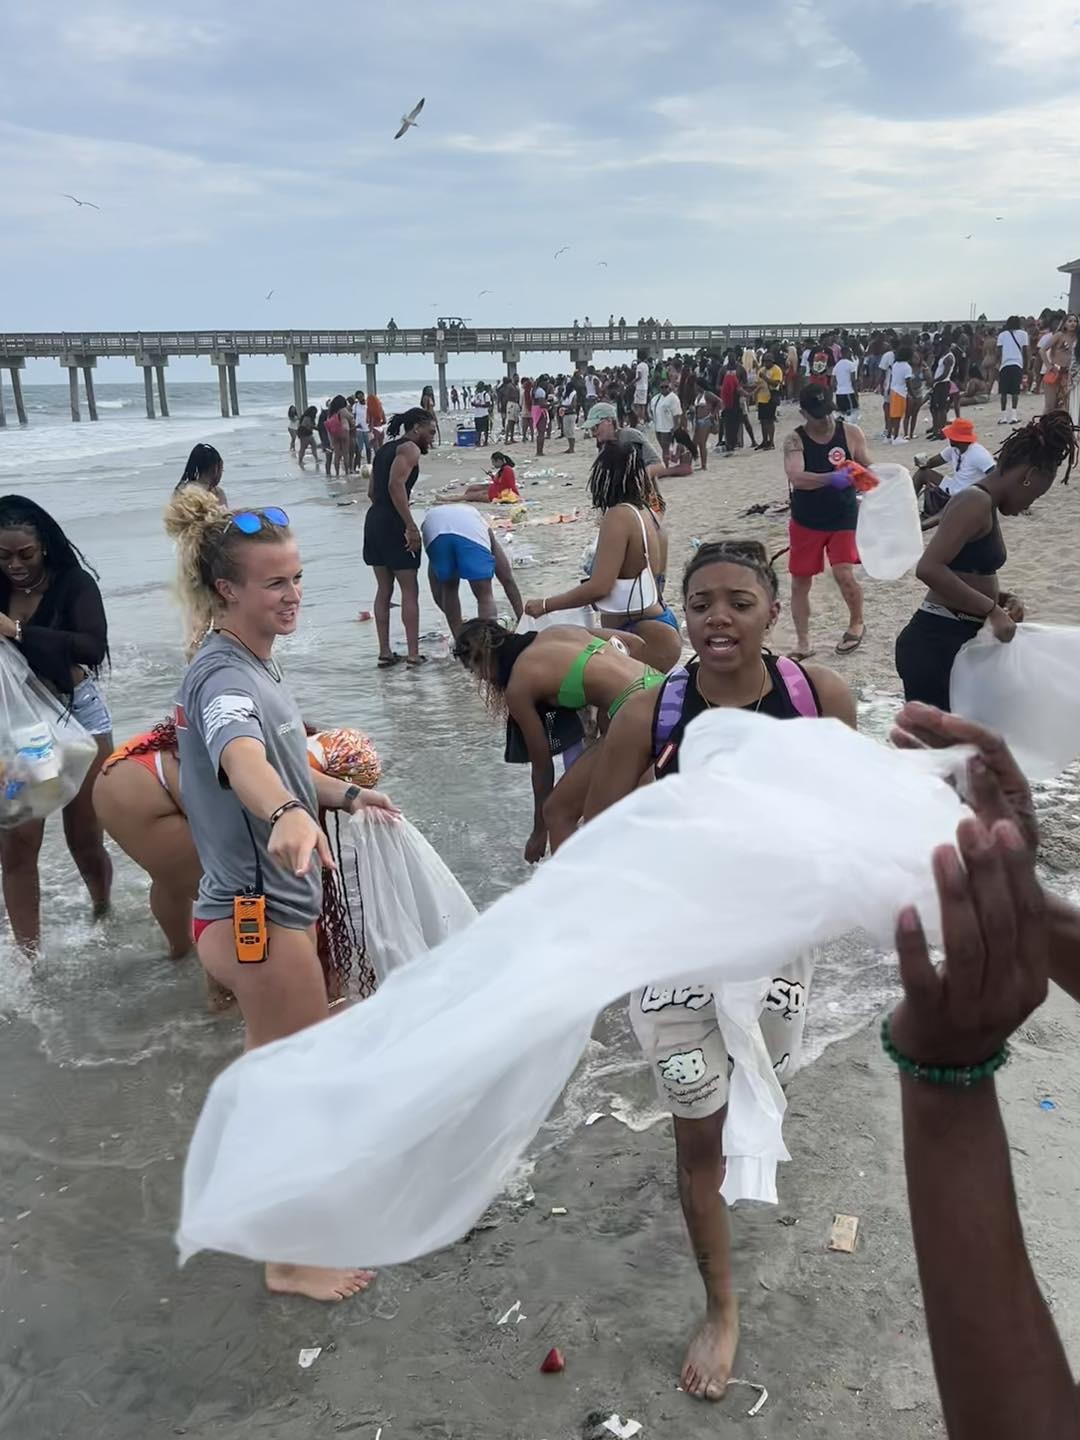 Cleanup efforts on Tybee on Sunday, April 21